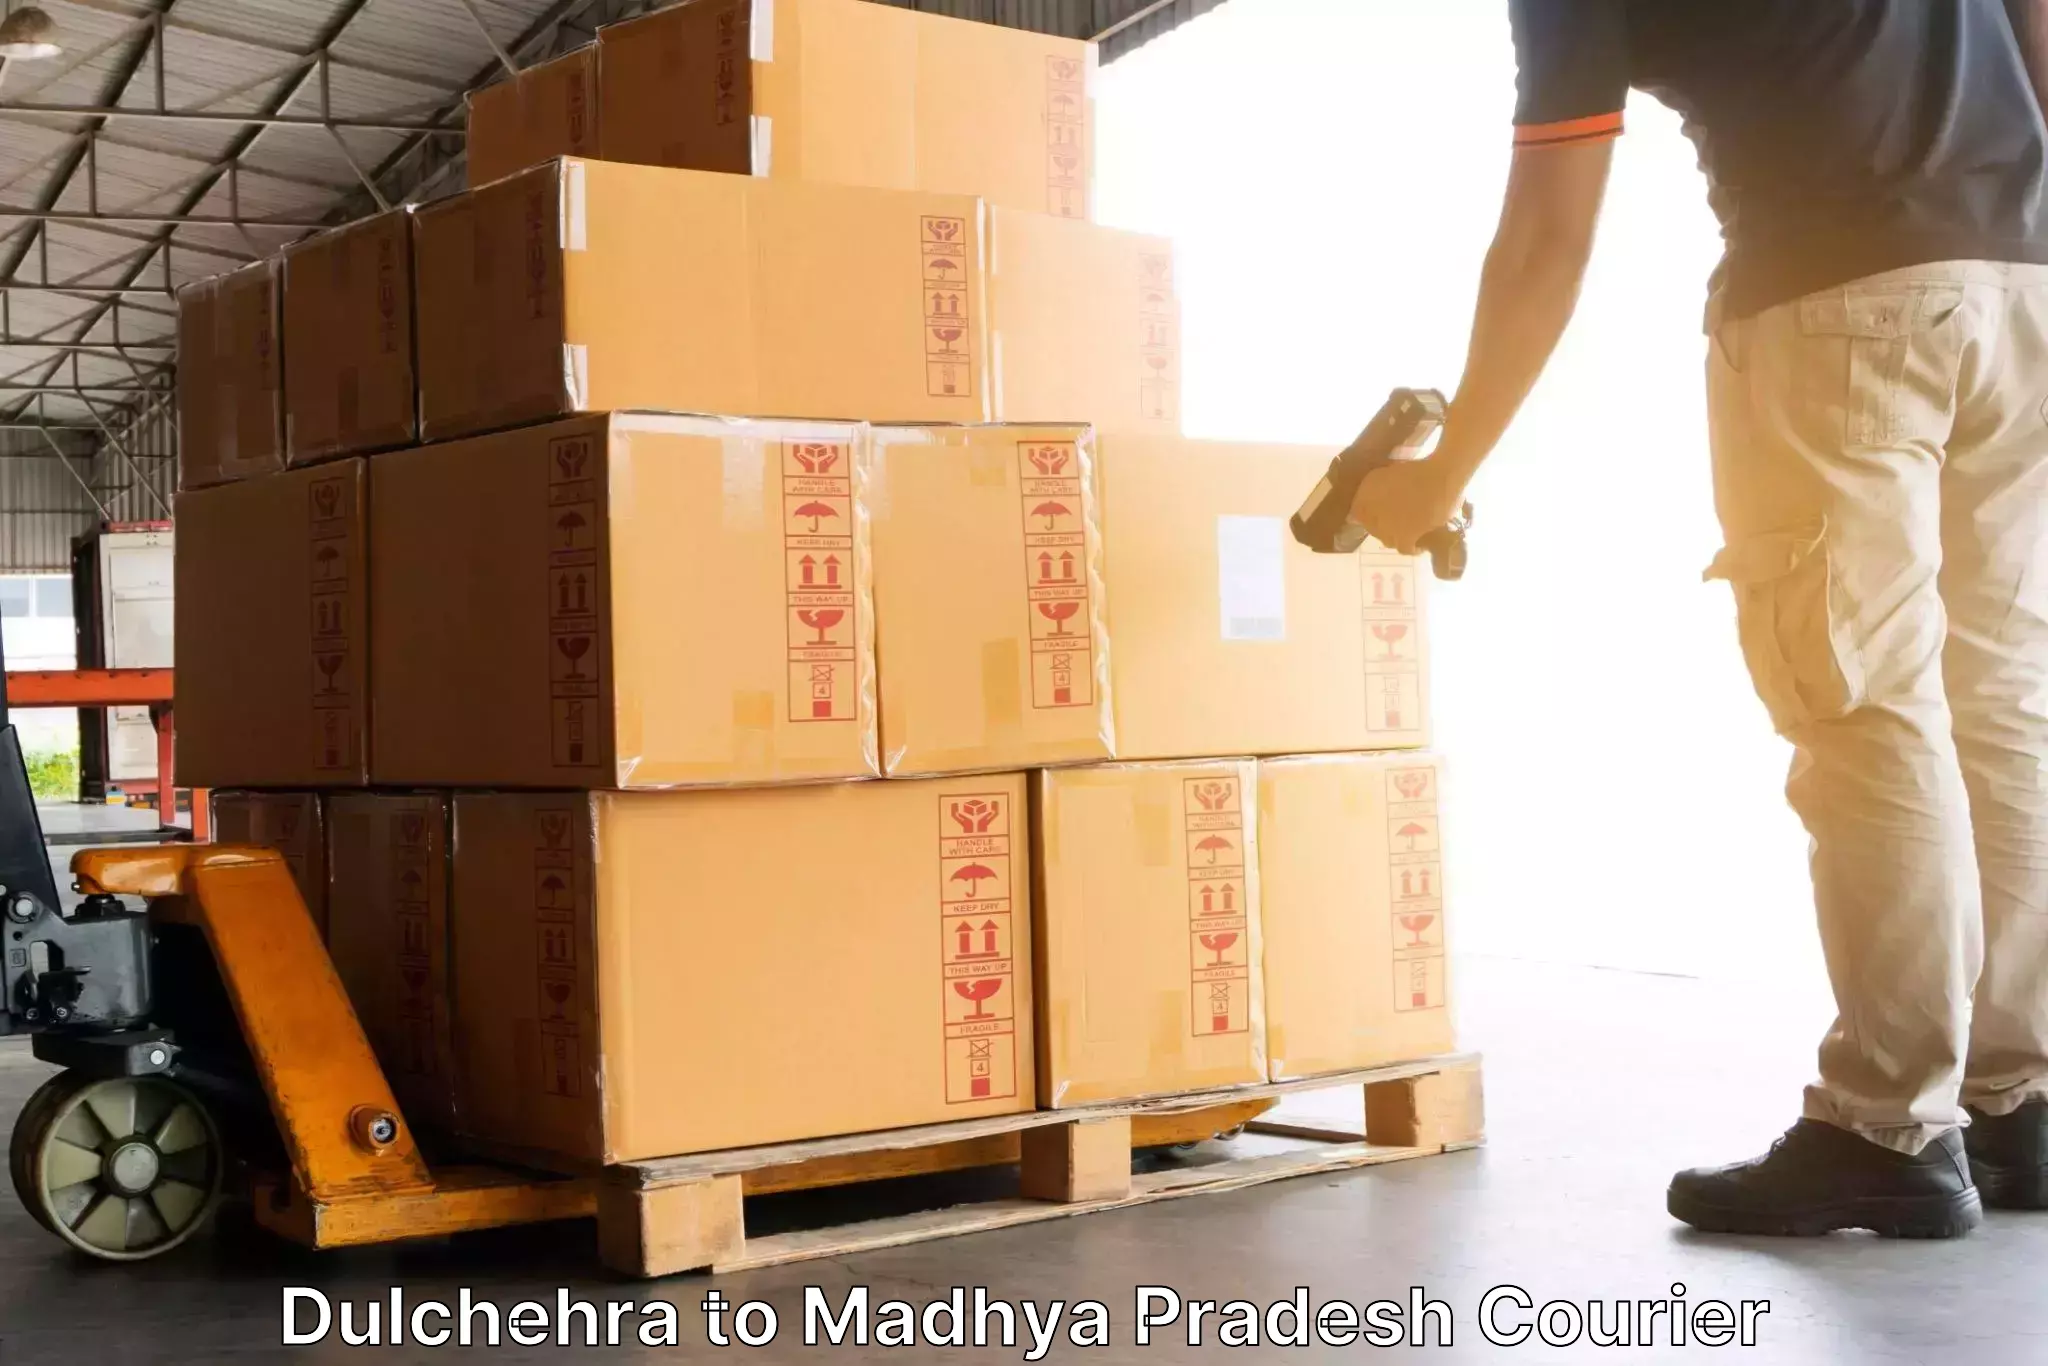 Express package services Dulchehra to Maheshwar